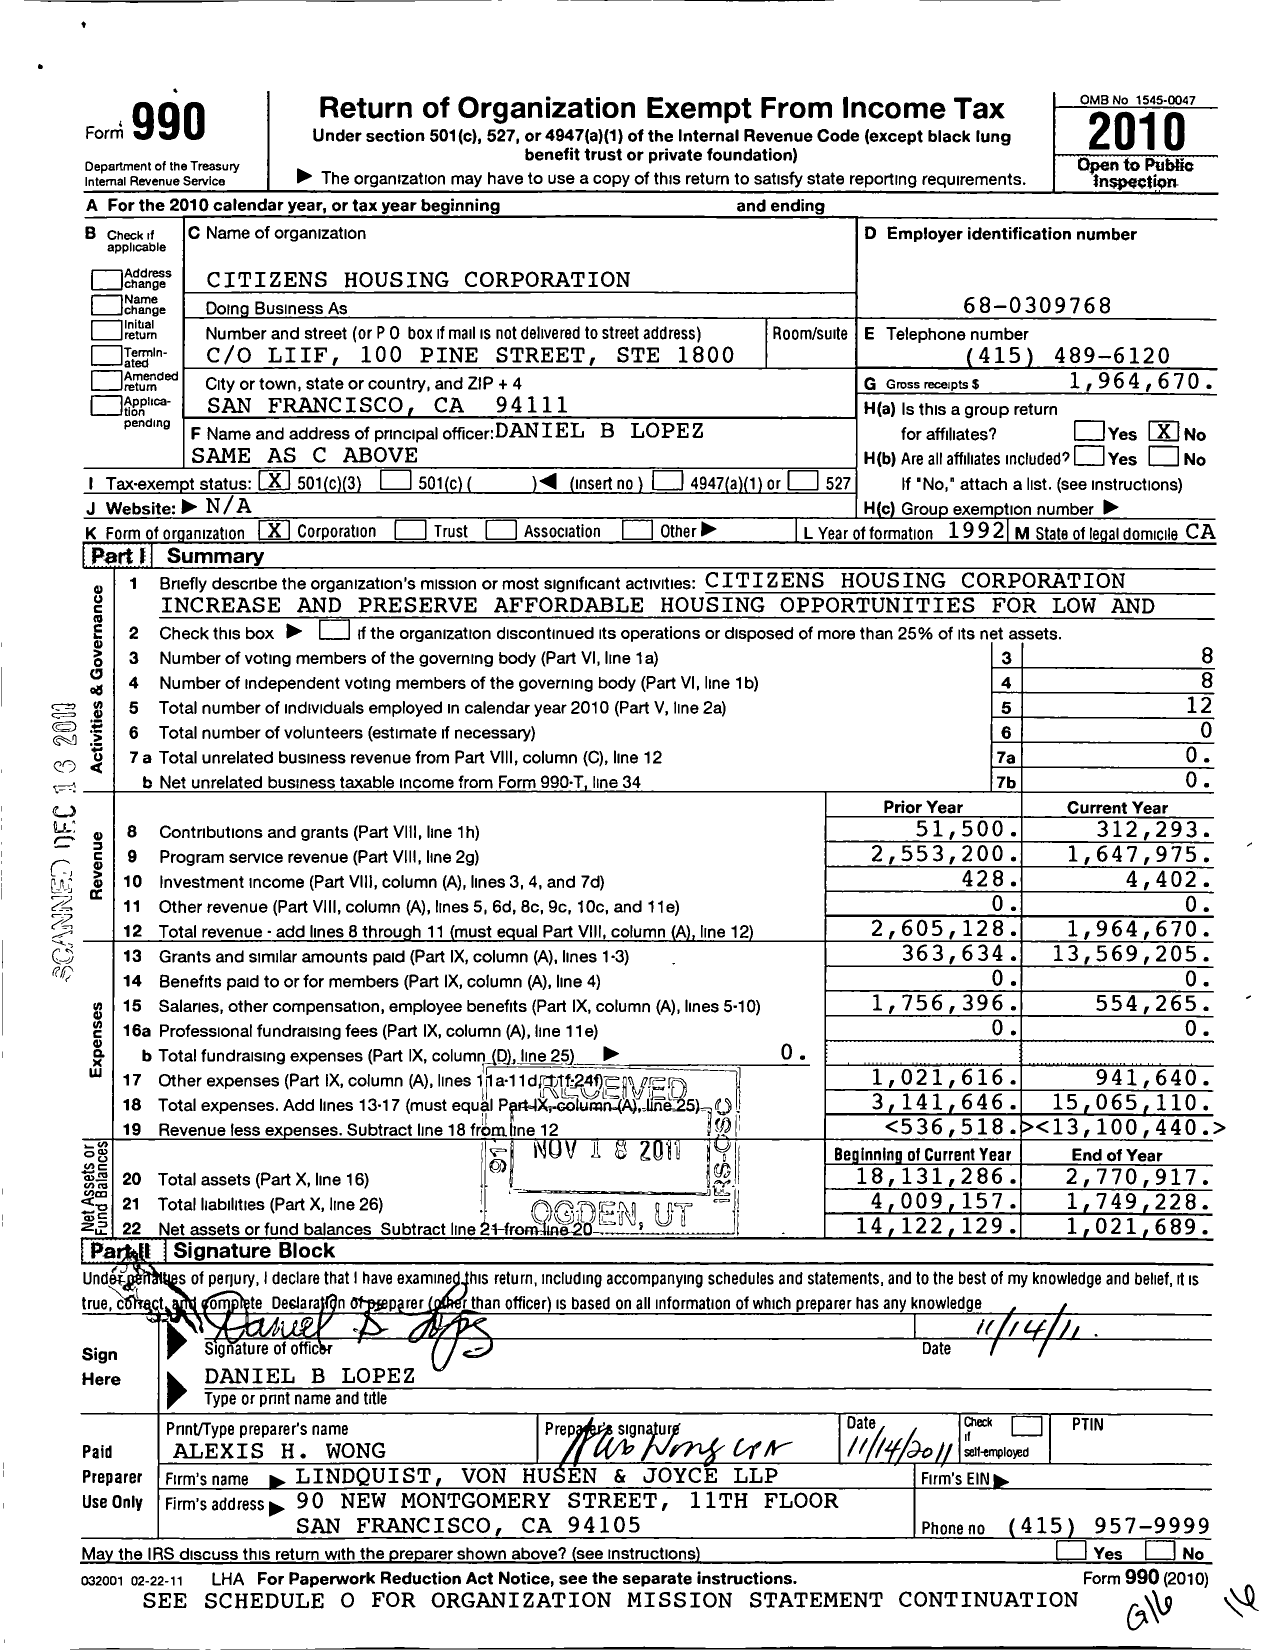 Image of first page of 2010 Form 990 for Citizens Housing Corporation